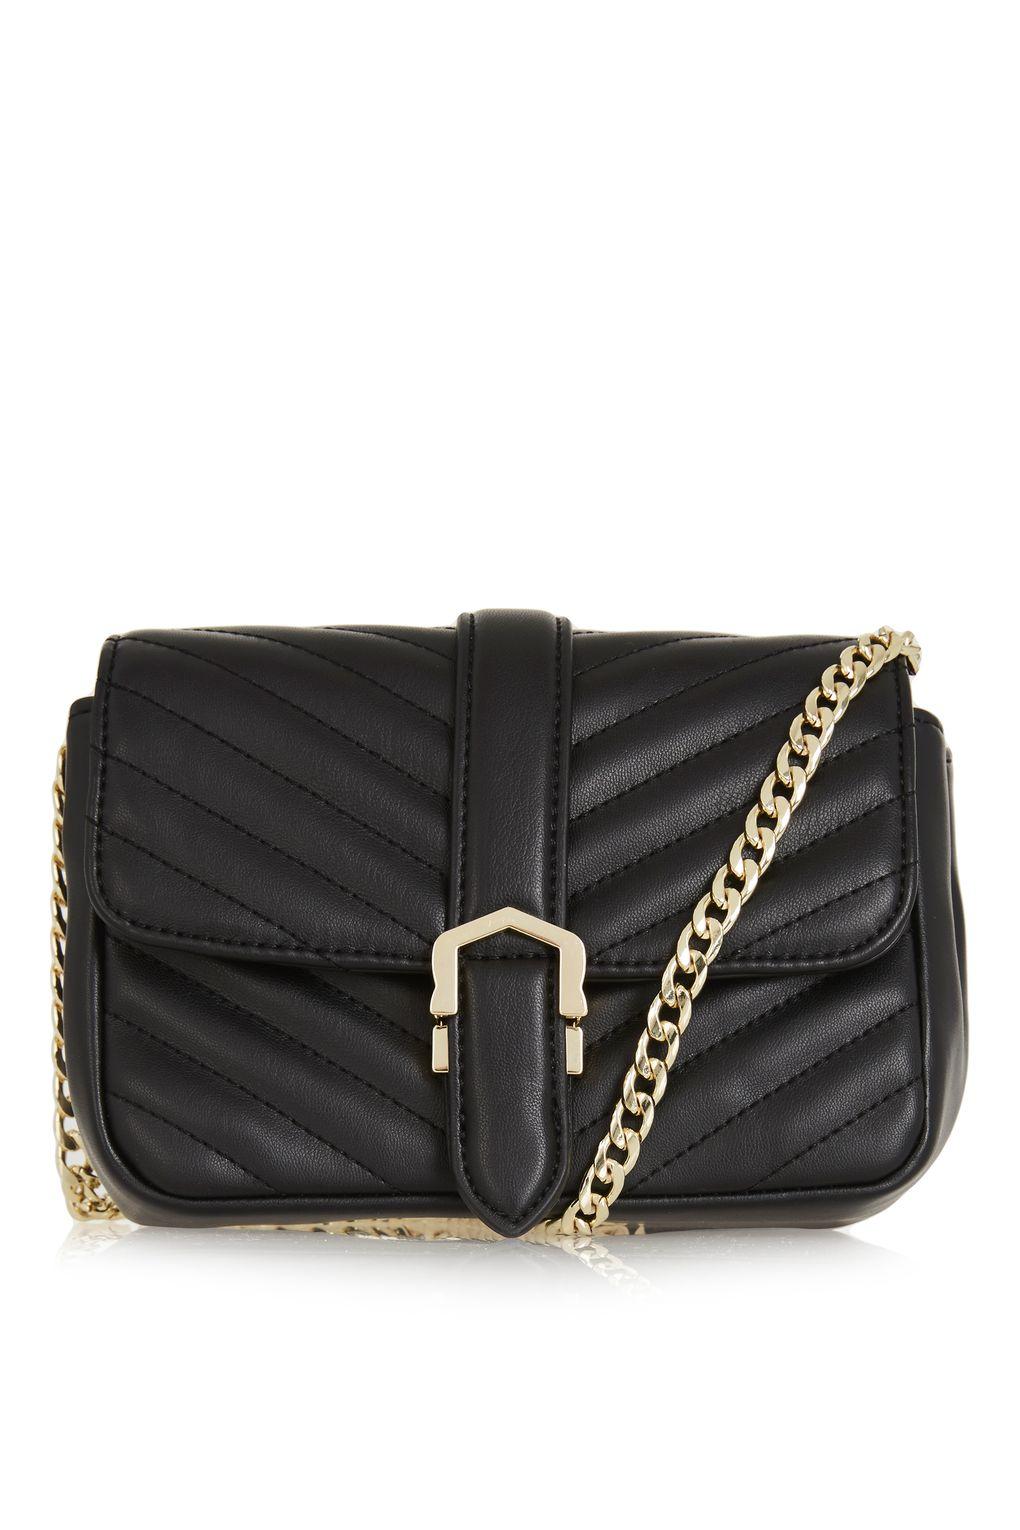 TOPSHOP Magic Quilted Crossbody Bag in Black - Lyst